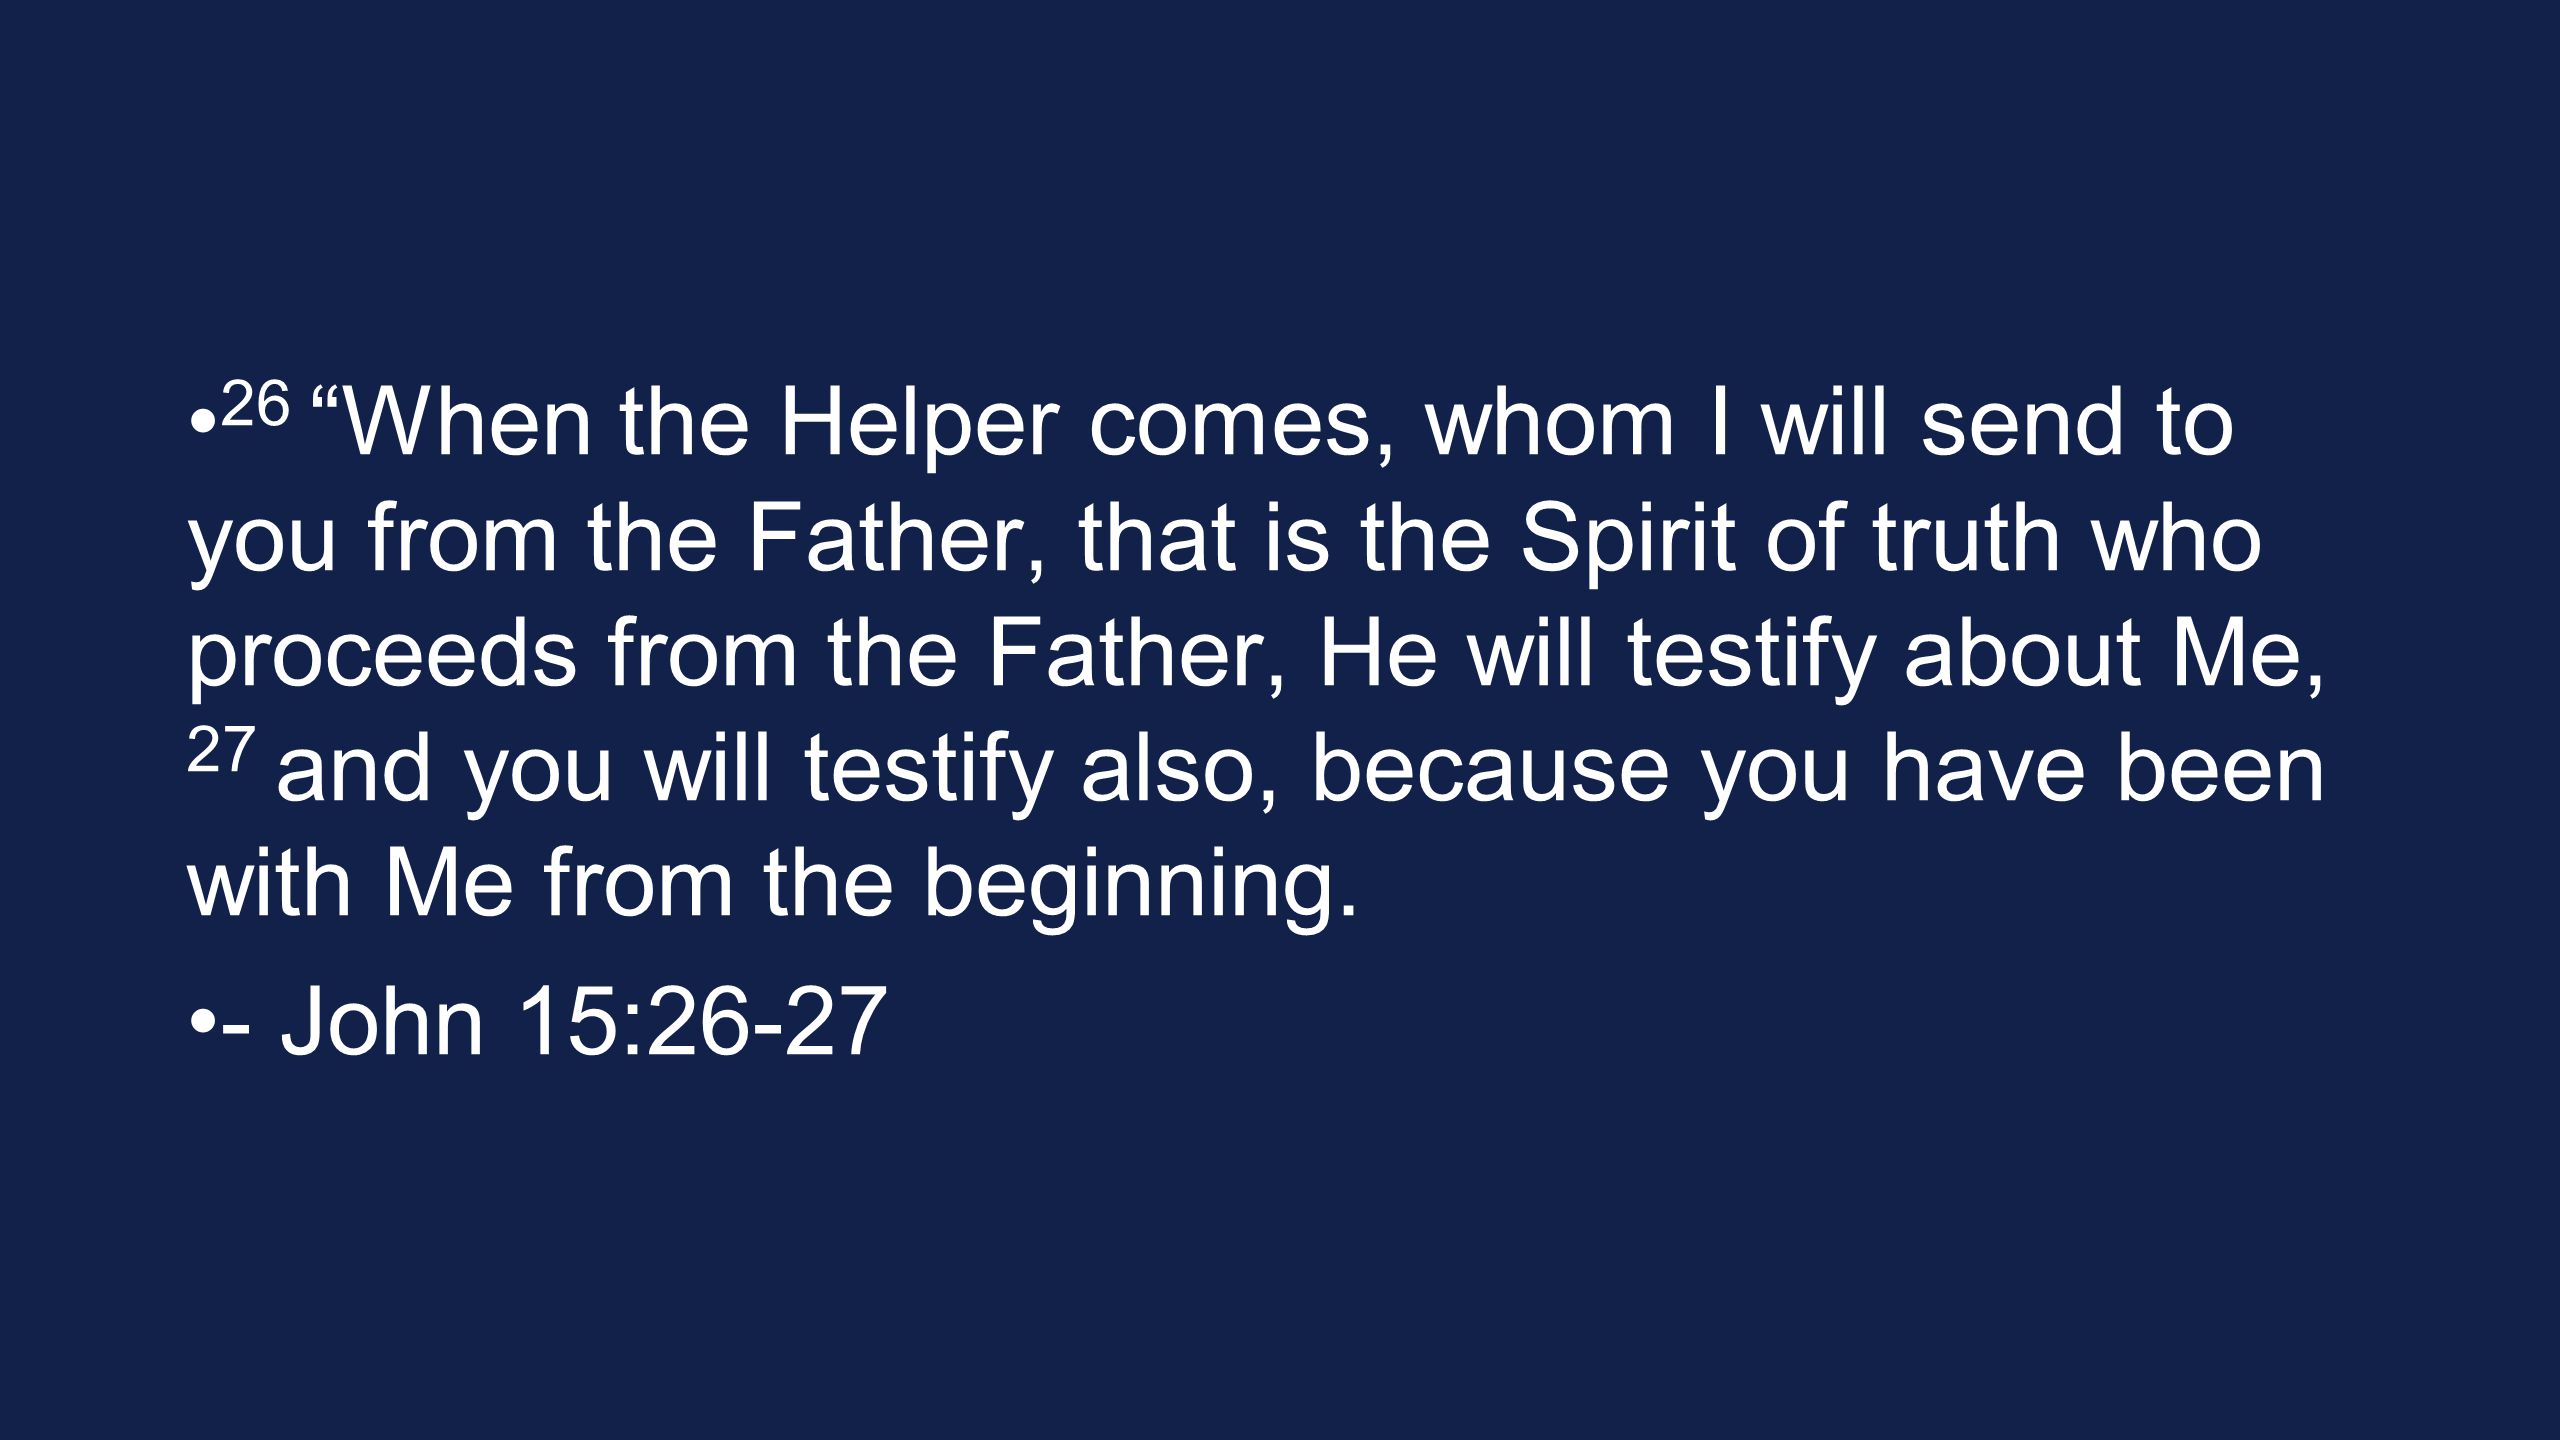 26 When the Helper comes, whom I will send to you from the Father, that is the Spirit of truth who proceeds from the Father, He will testify about Me, 27 and you will testify also, because you have been with Me from the beginning.